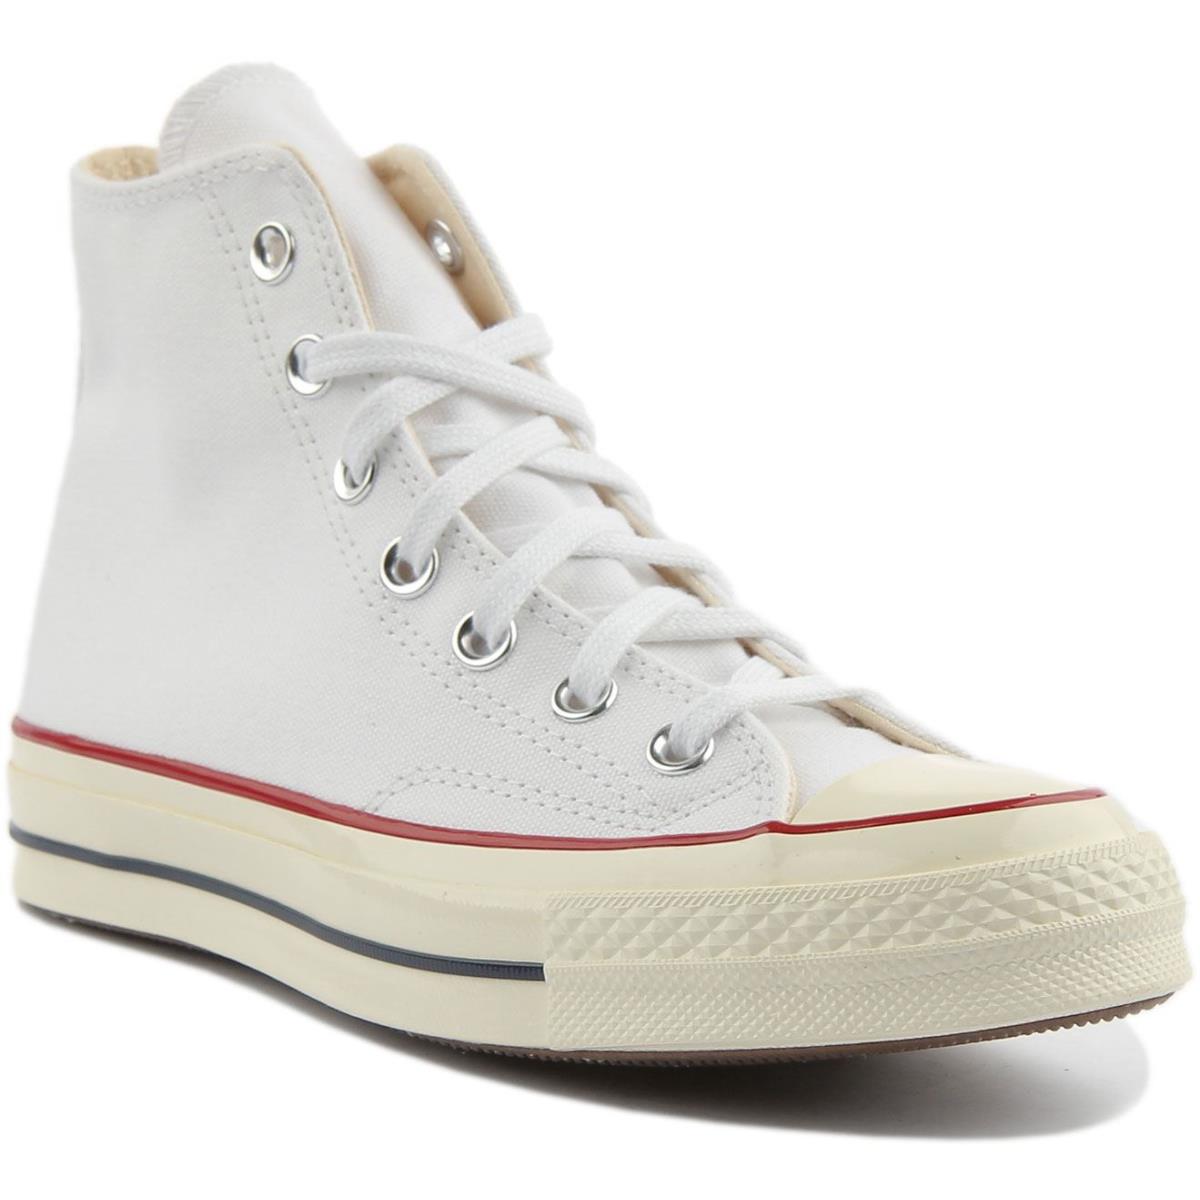 Converse All Star 162056 Chuck 70 High Top Trainers In White Size US 4 - 13 WHITE